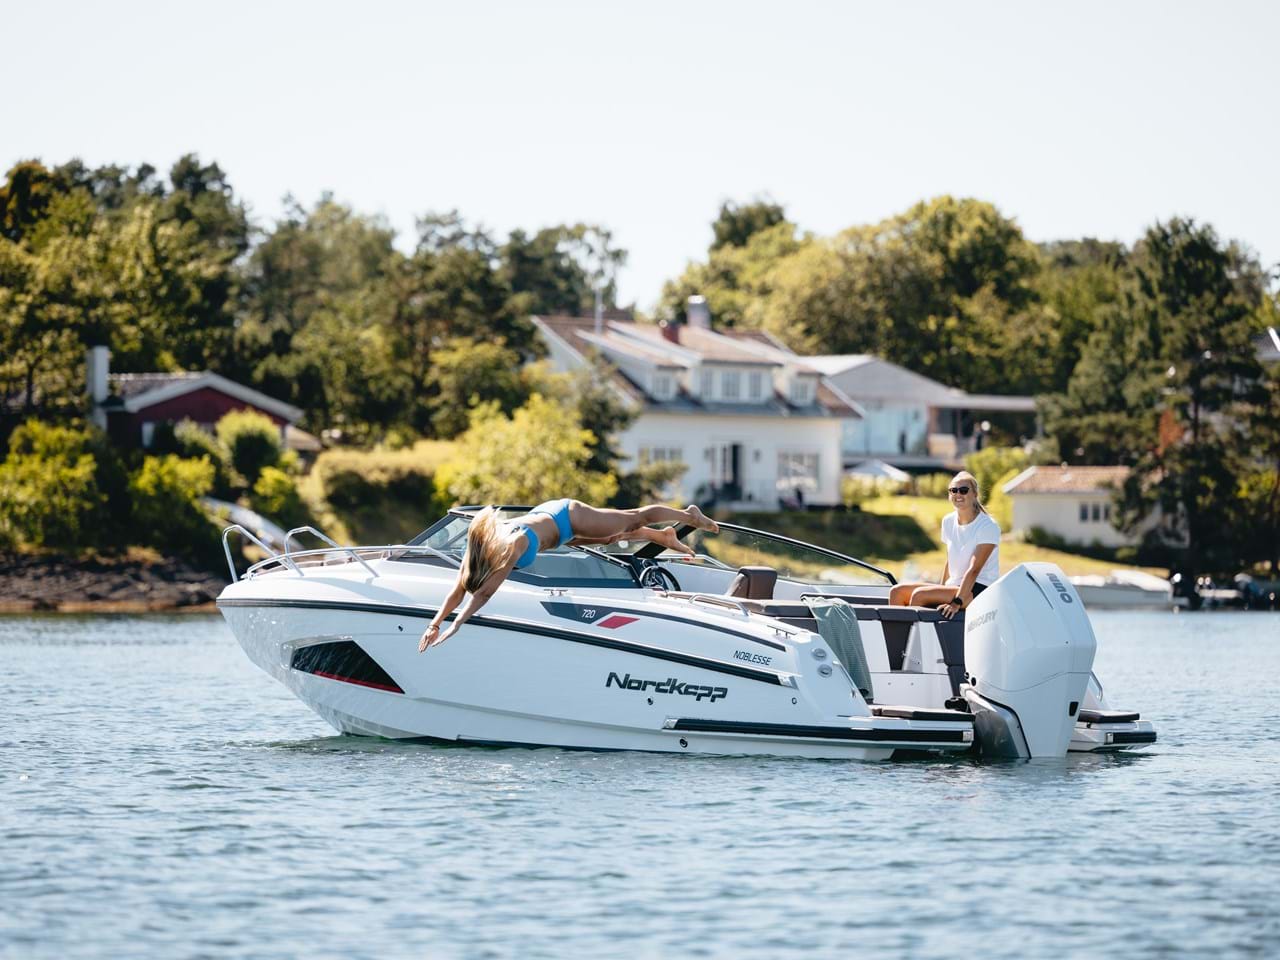 The Daycruiser Nordkapp Noblesse 720 - summer boating perfection